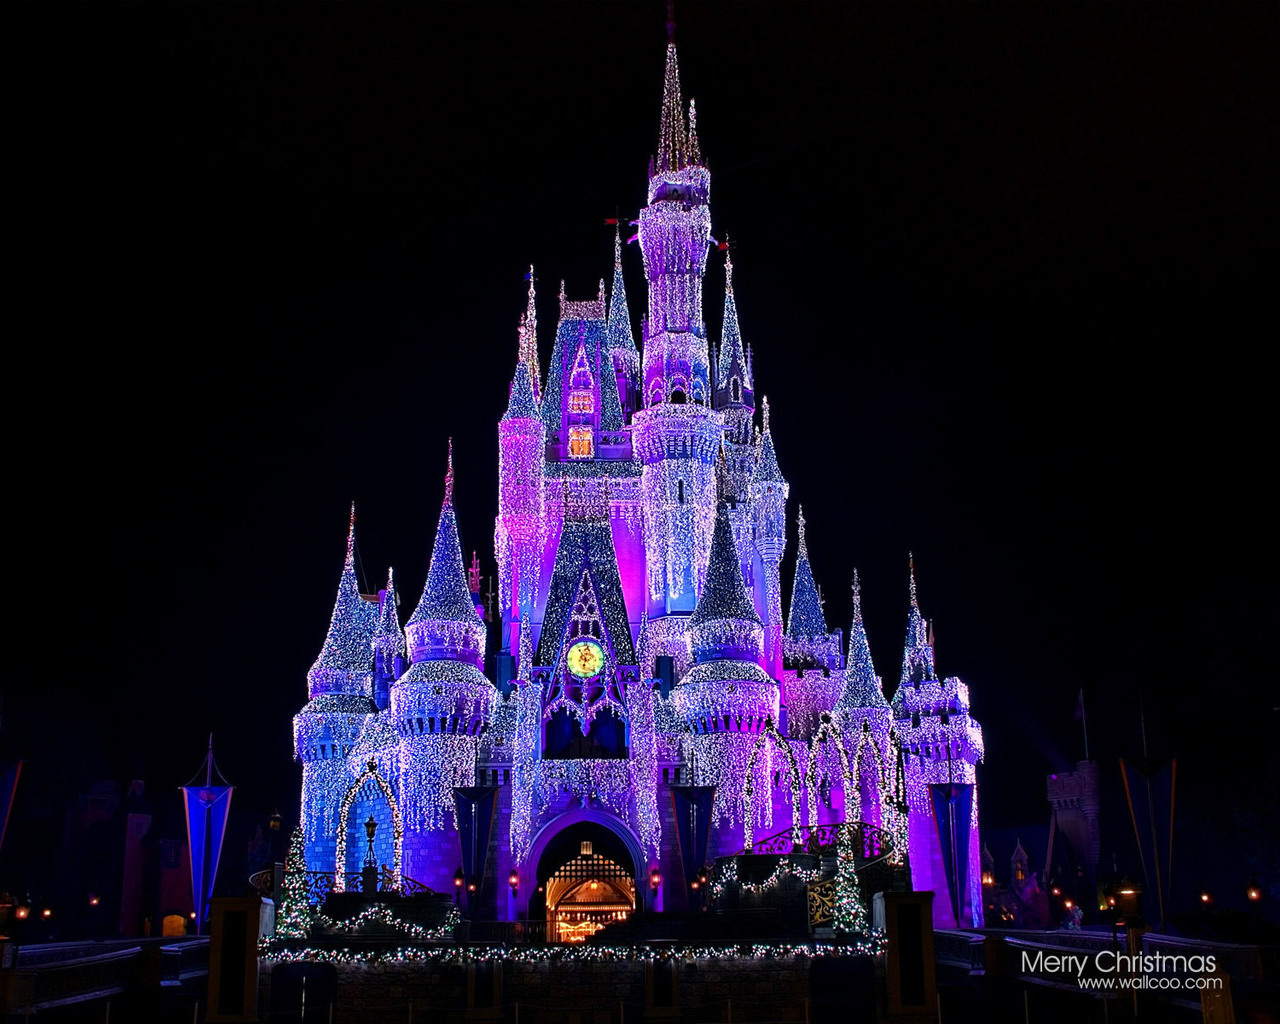  Castle Disney wallpapers for free wallpapers pictures free download